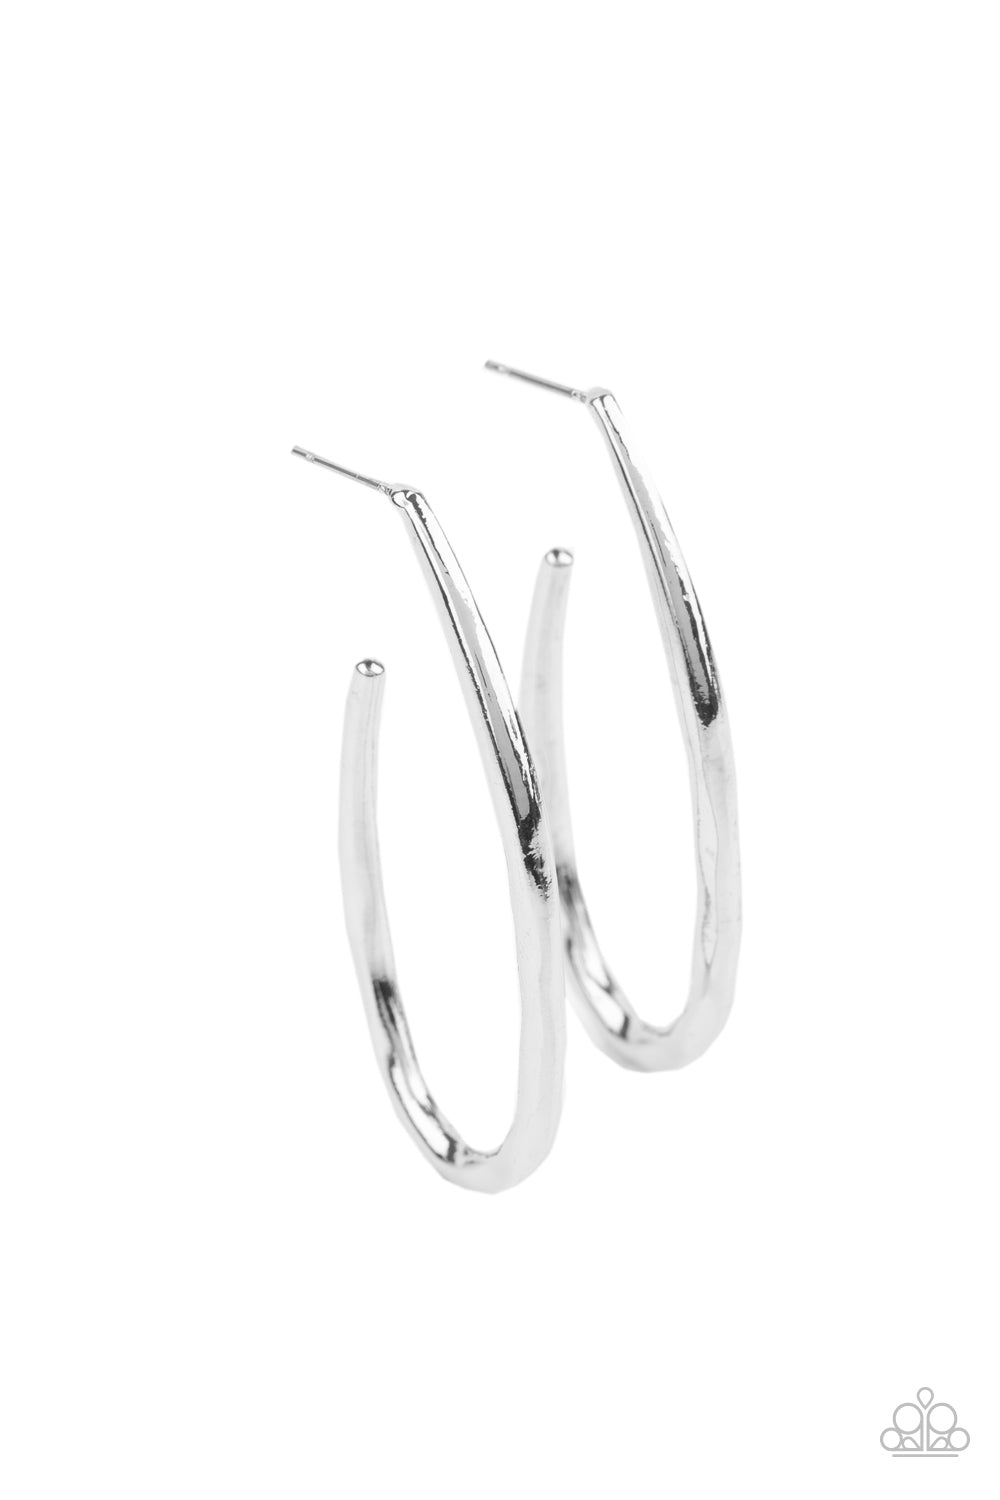 Totally Hooked - silver - Paparazzi earrings